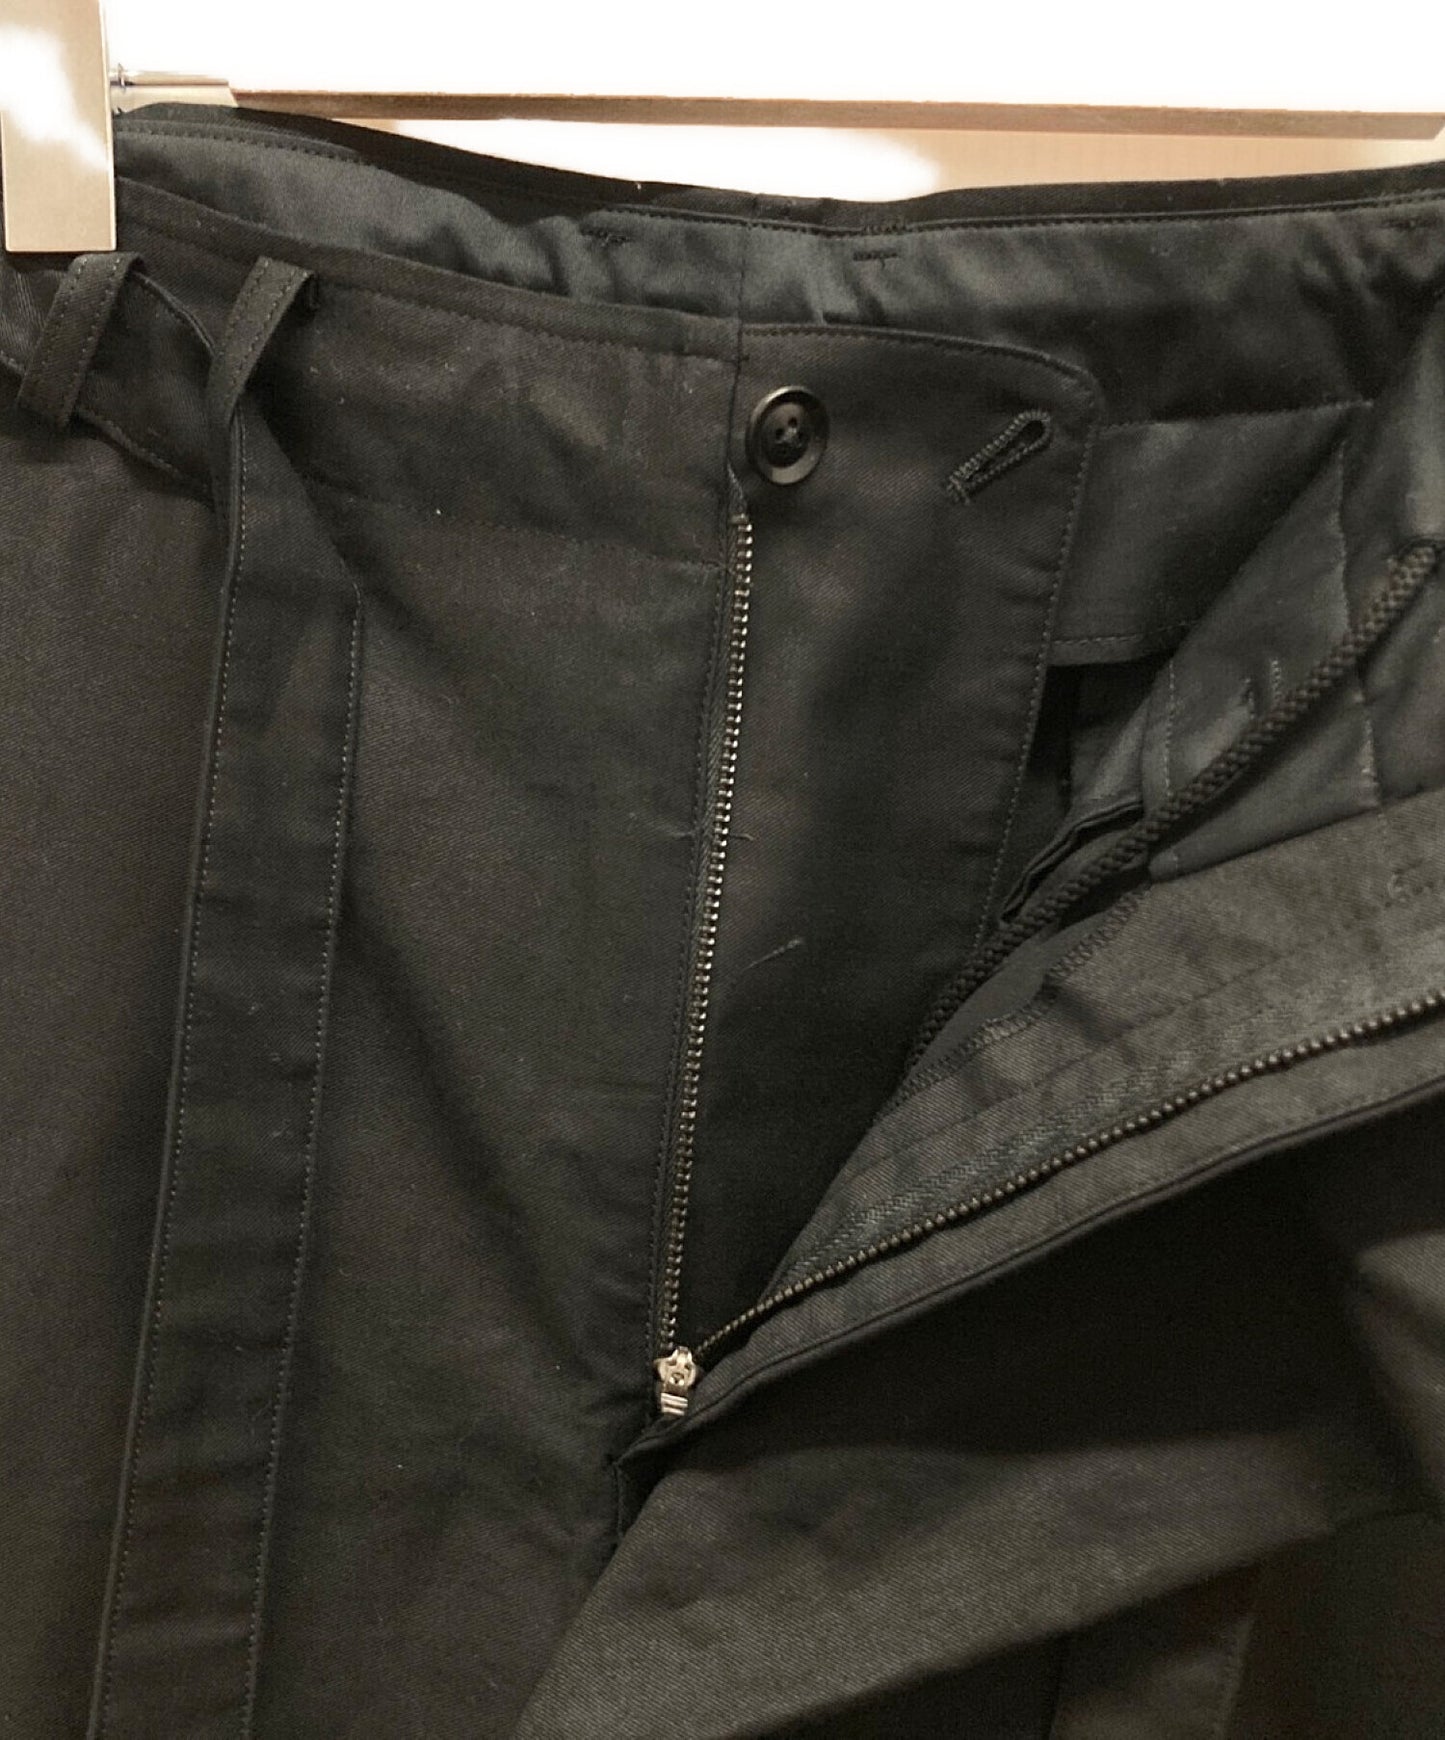 Y's BLACK TWILL ANKLE LENGTH WRAP PANTS